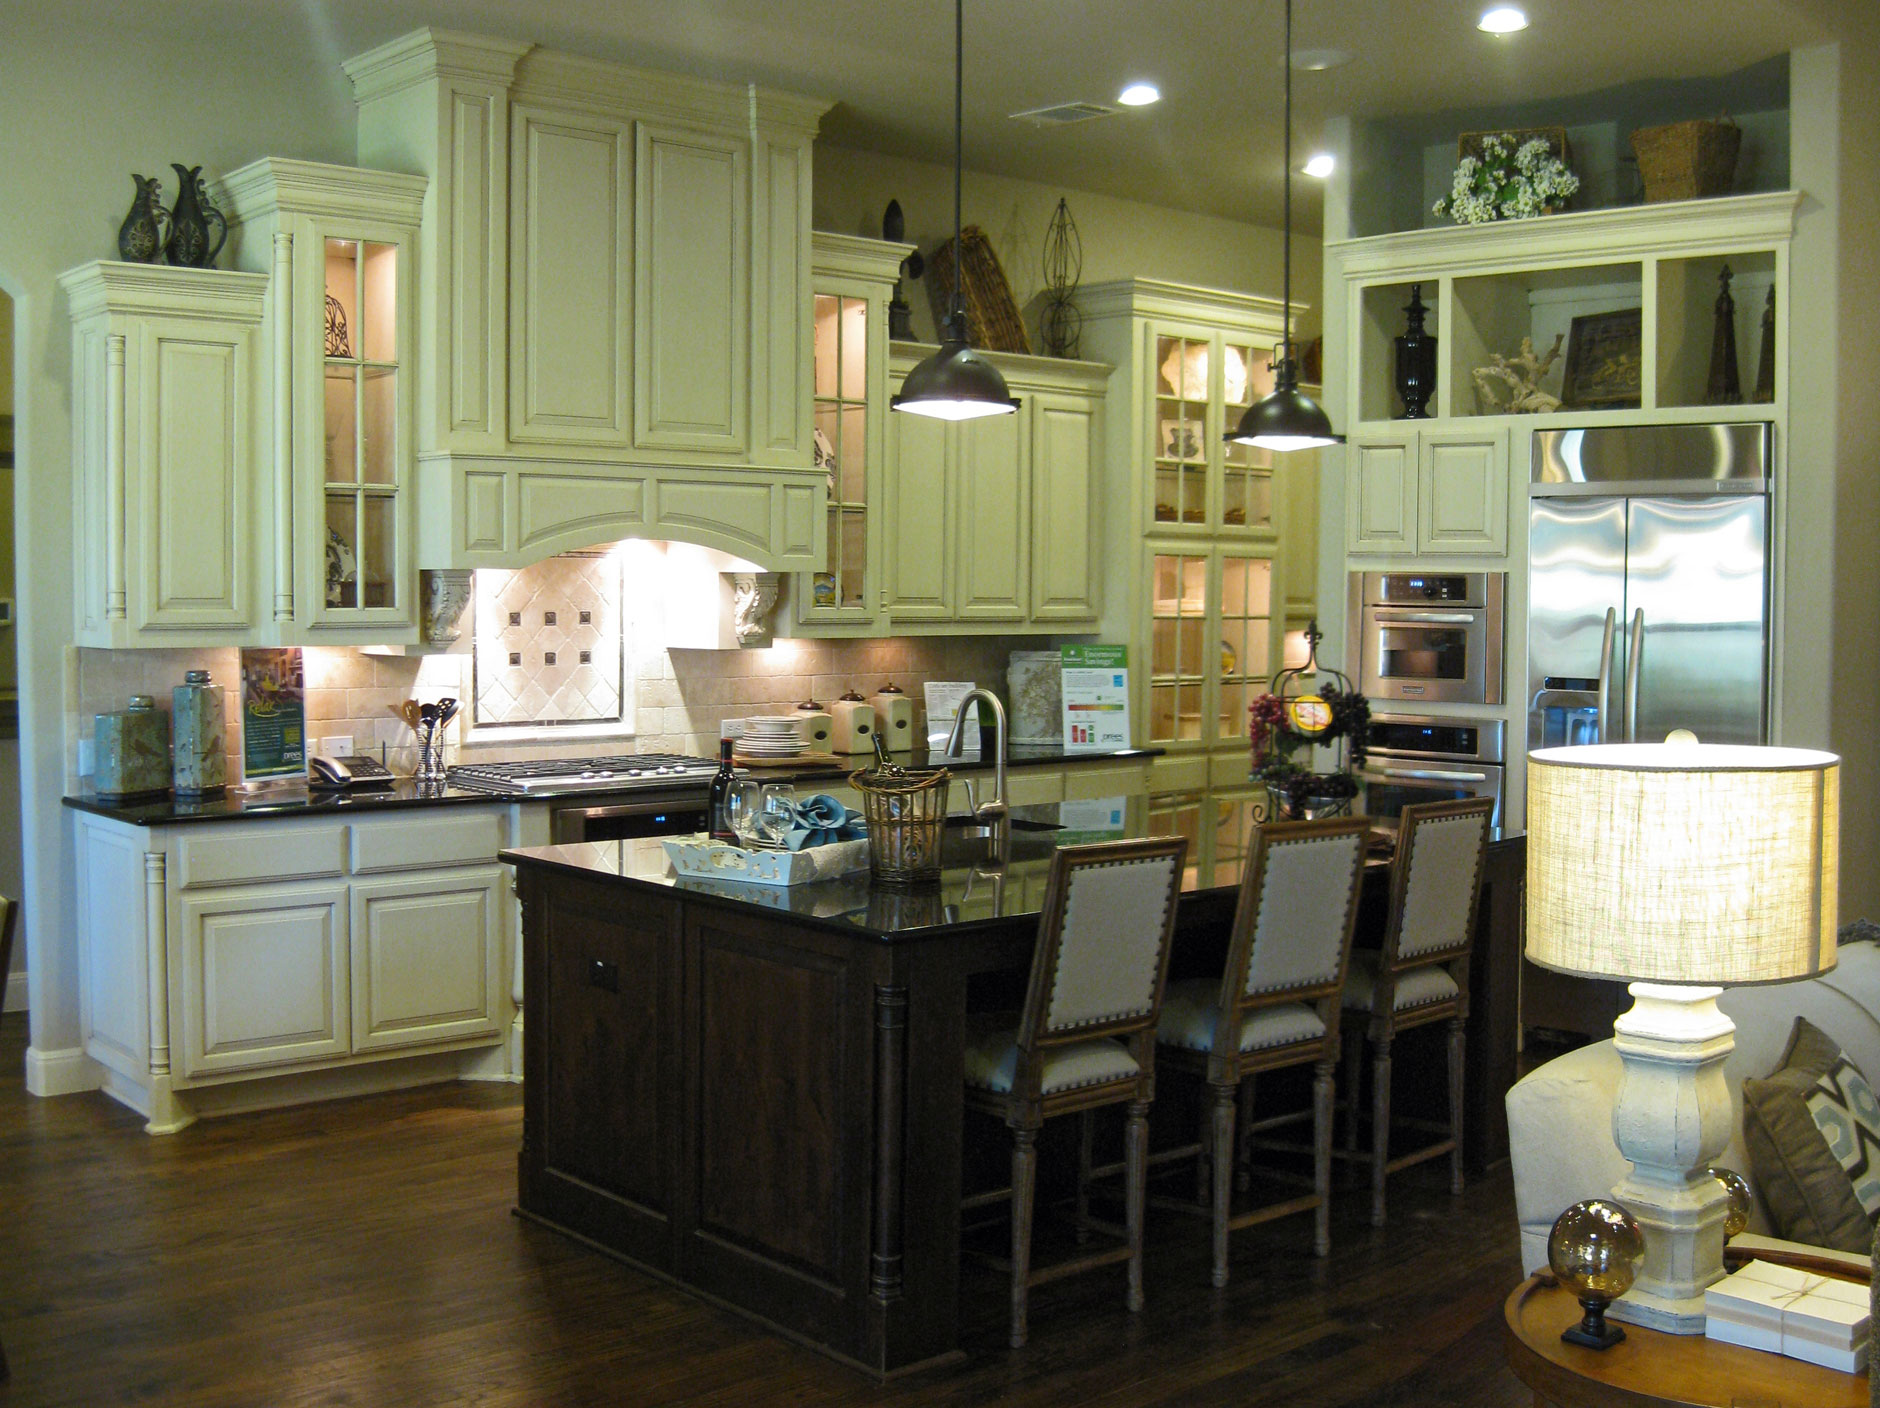 White Kitchen Cabinets Archives - Burrows Cabinets - central Texas ...